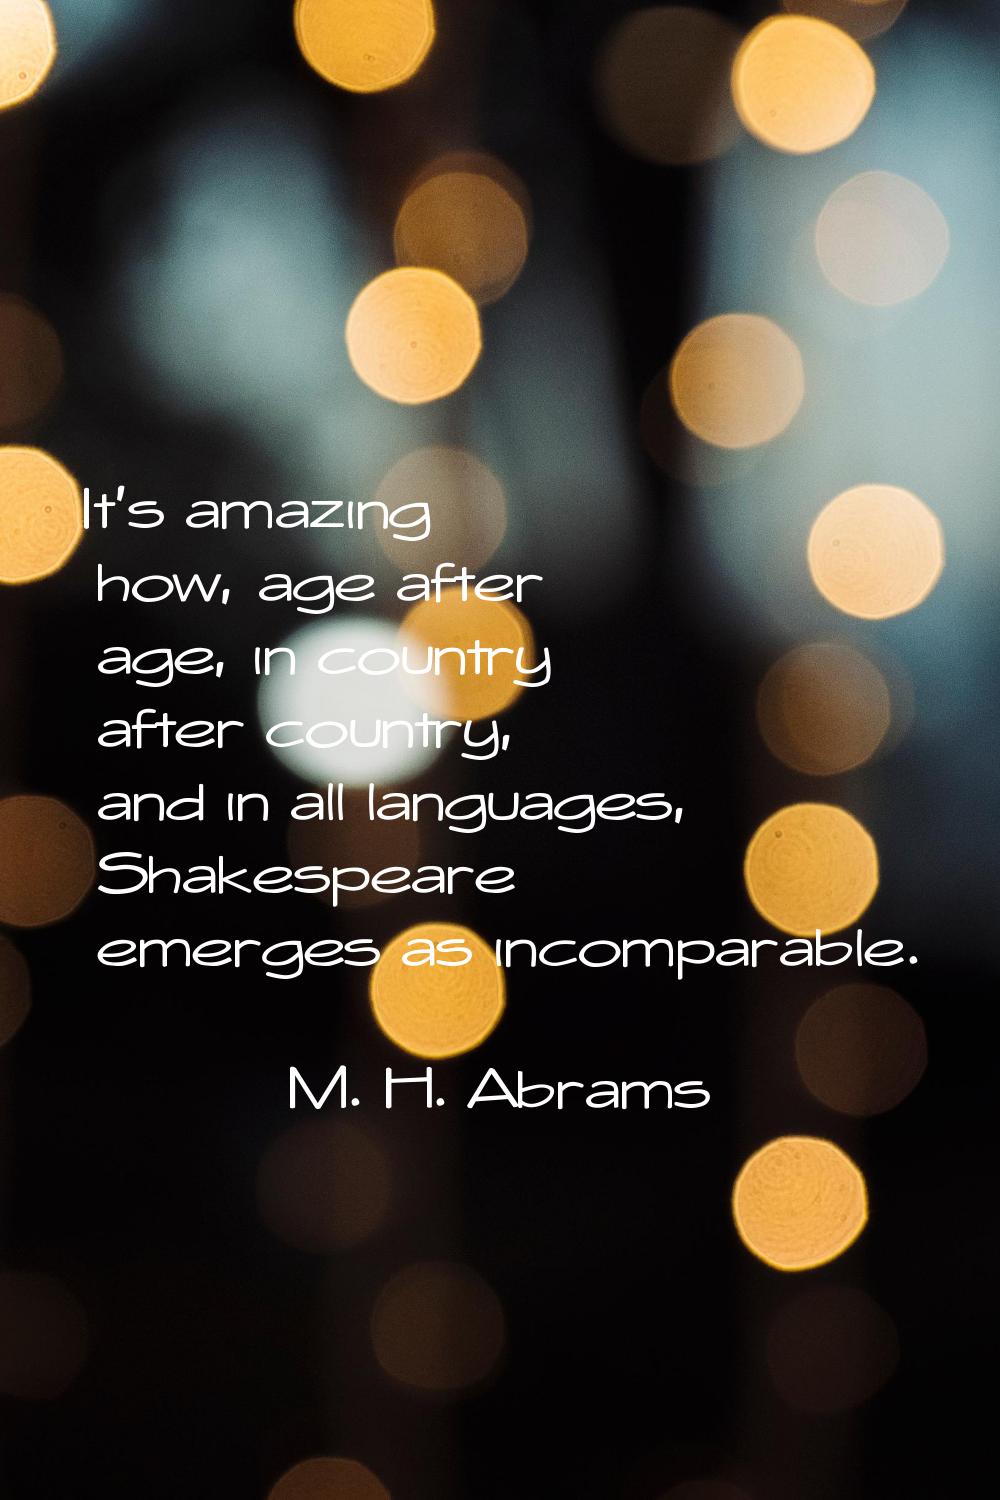 It's amazing how, age after age, in country after country, and in all languages, Shakespeare emerge